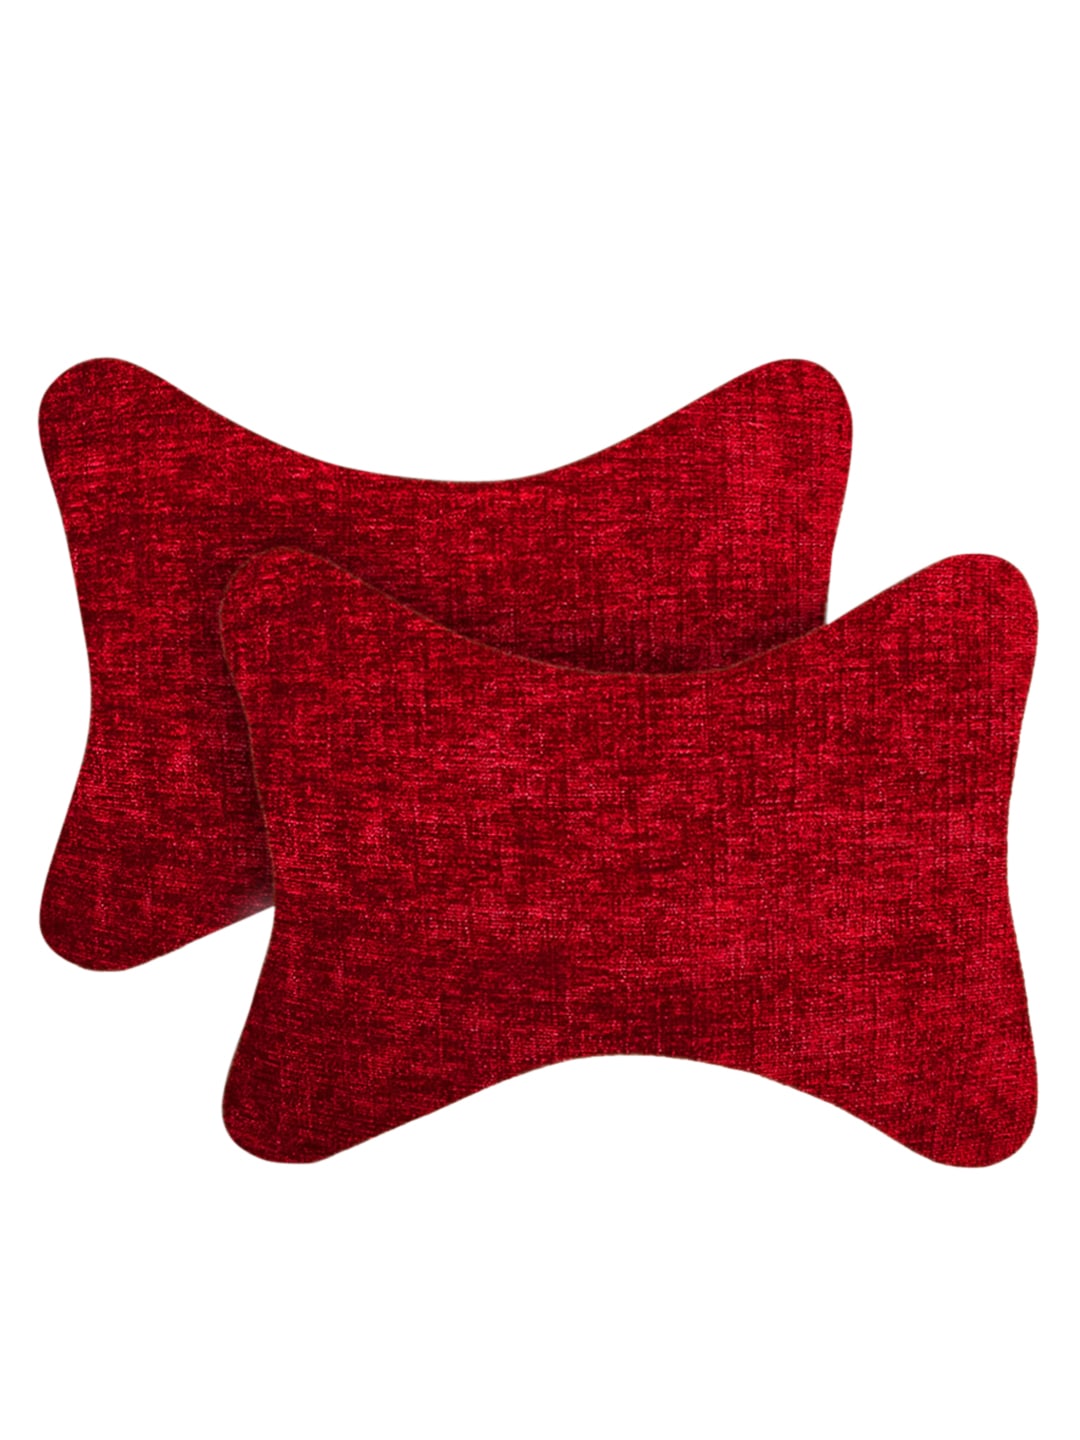 Lushomes Set of 2 Red Neck Rest Pillow for Cars Price in India